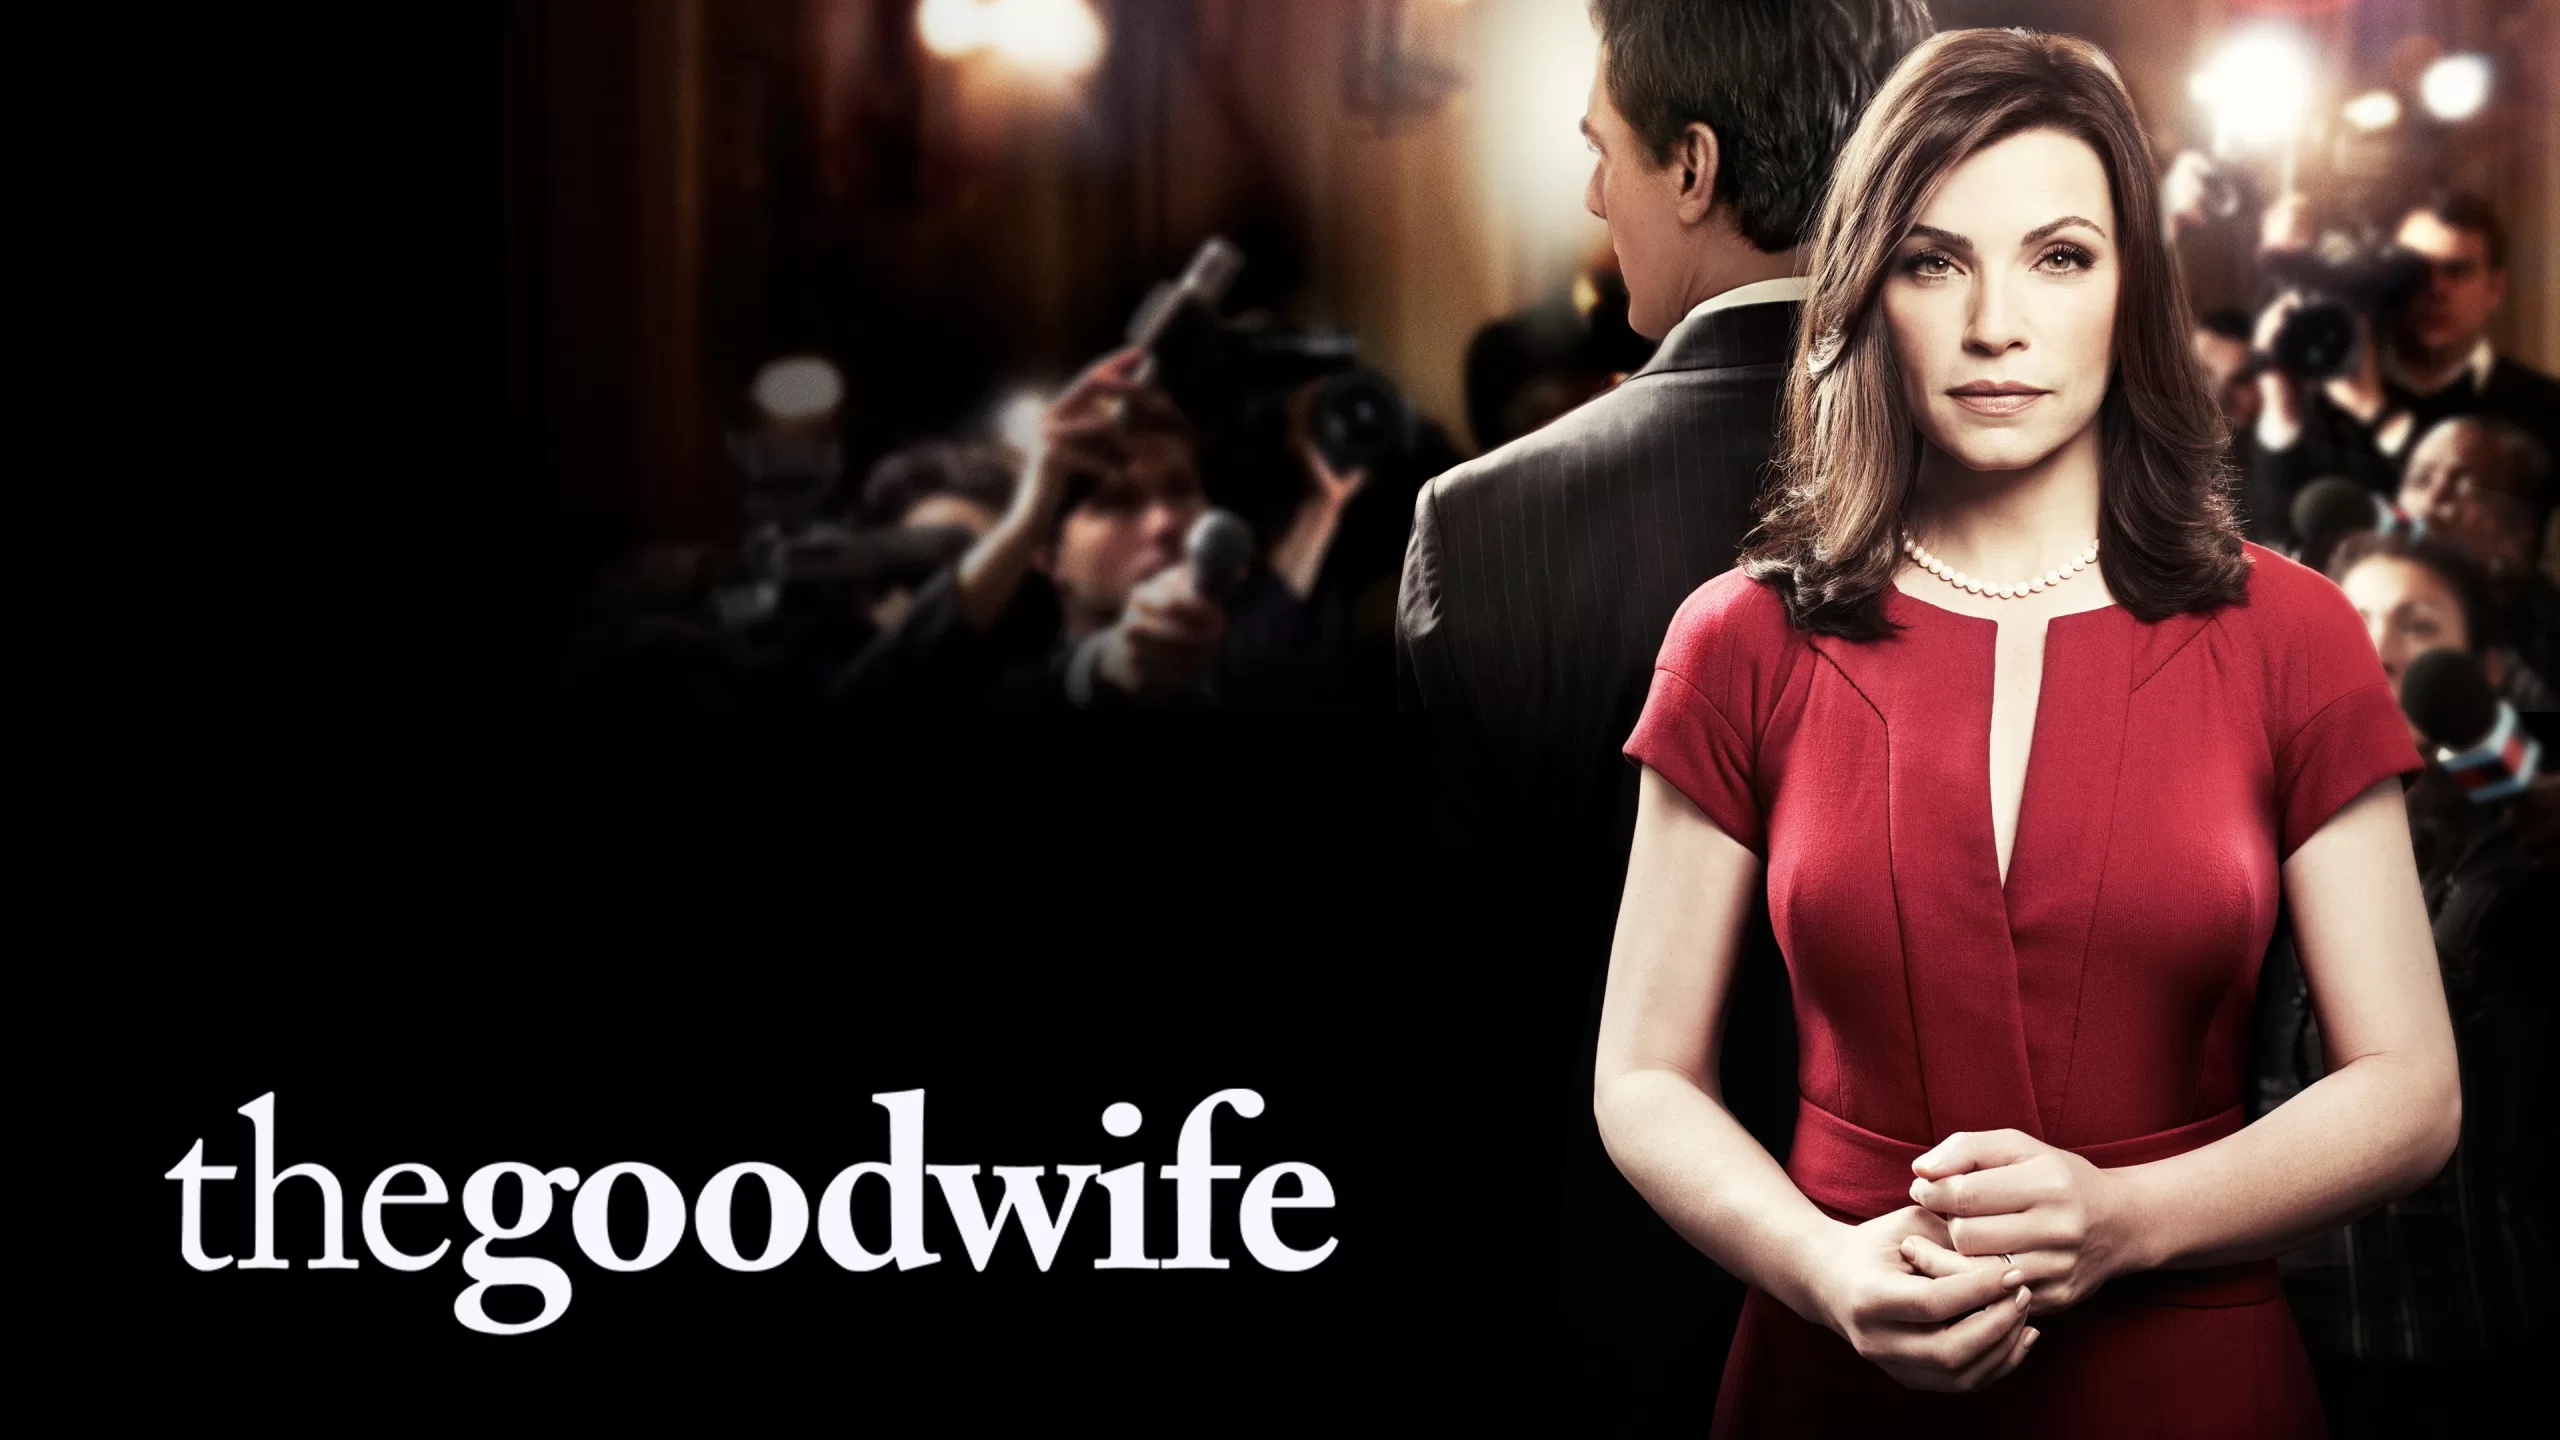 The good wife 